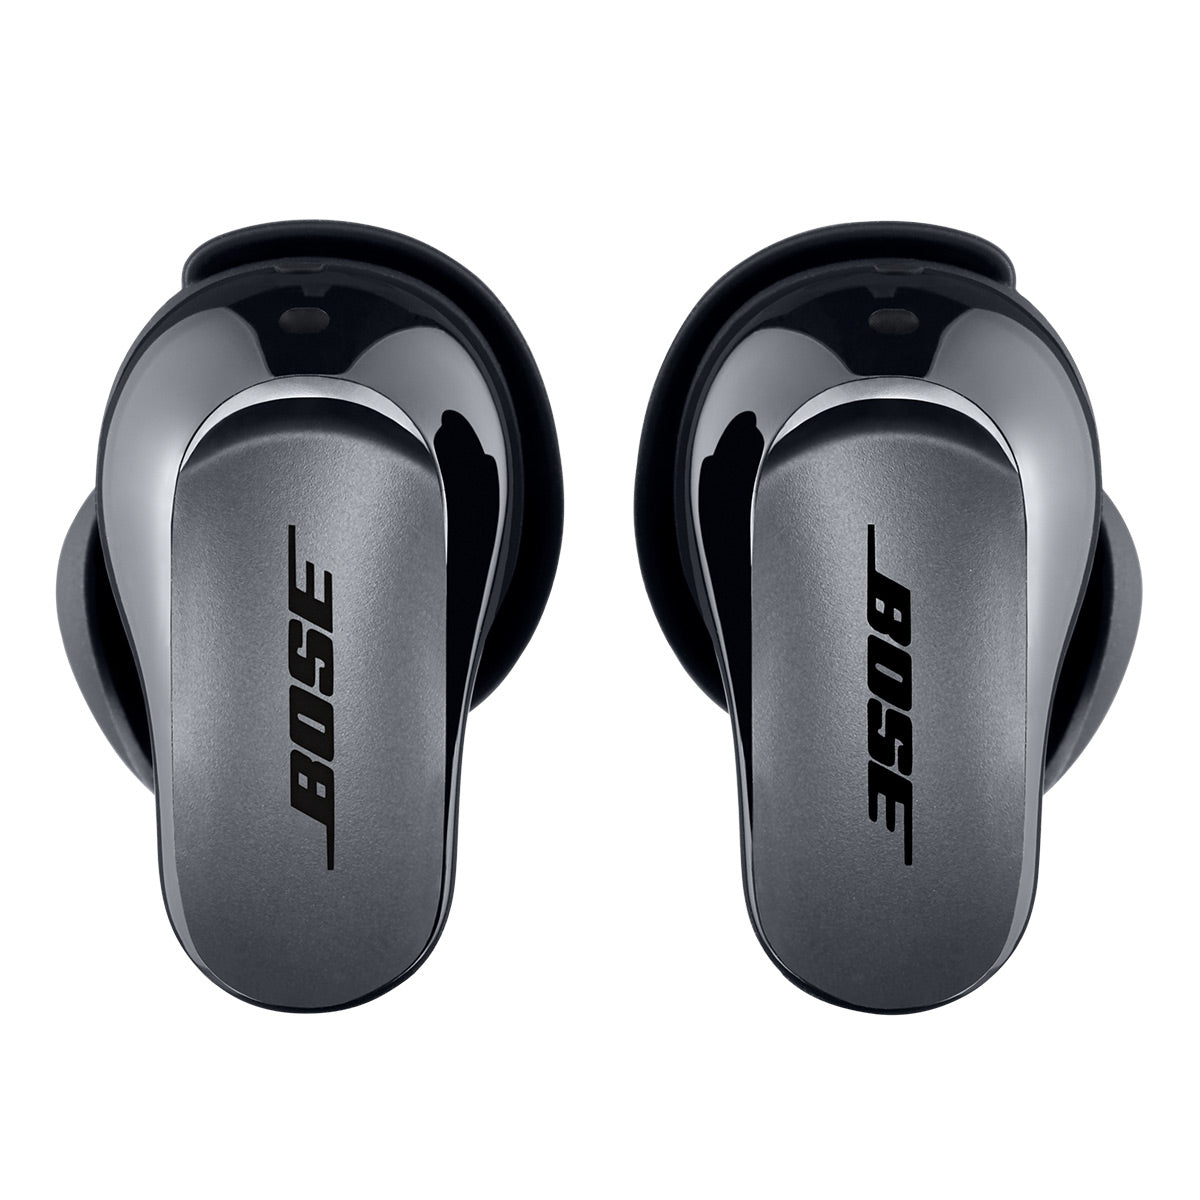 Bose QuietComfort Headphones with Active Noise Cancellation with QuietComfort Ultra Wireless Noise Cancelling Earbuds (Cypress Green/Black)